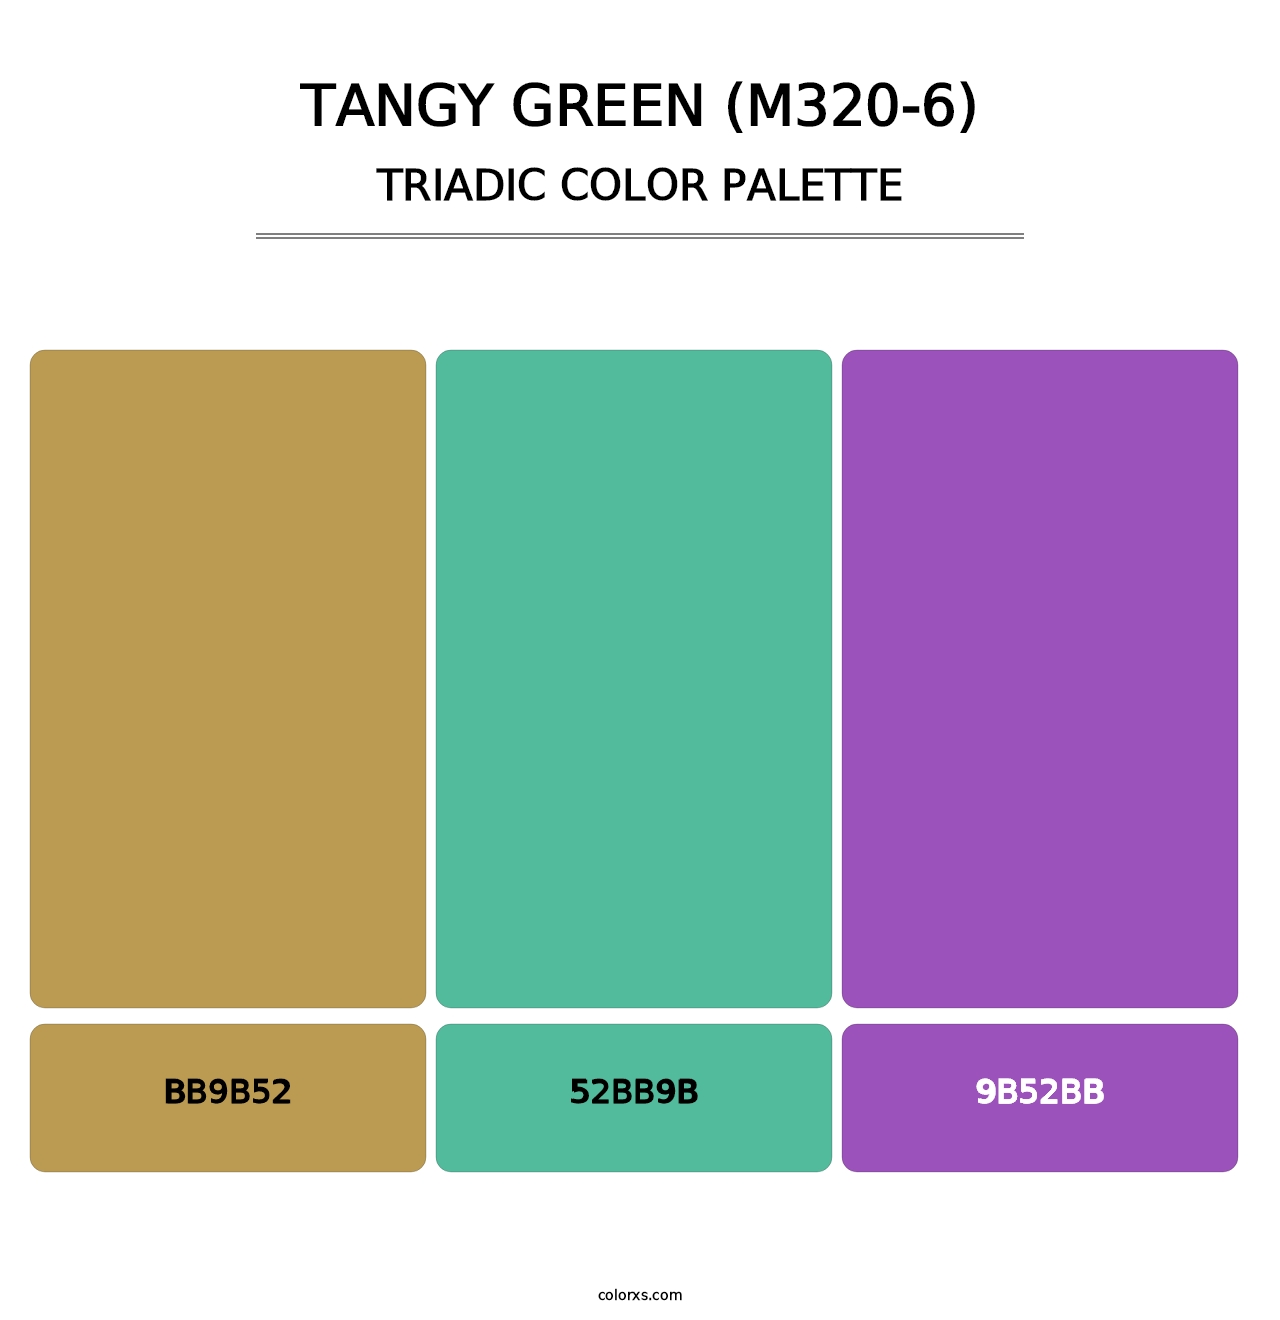 Tangy Green (M320-6) - Triadic Color Palette